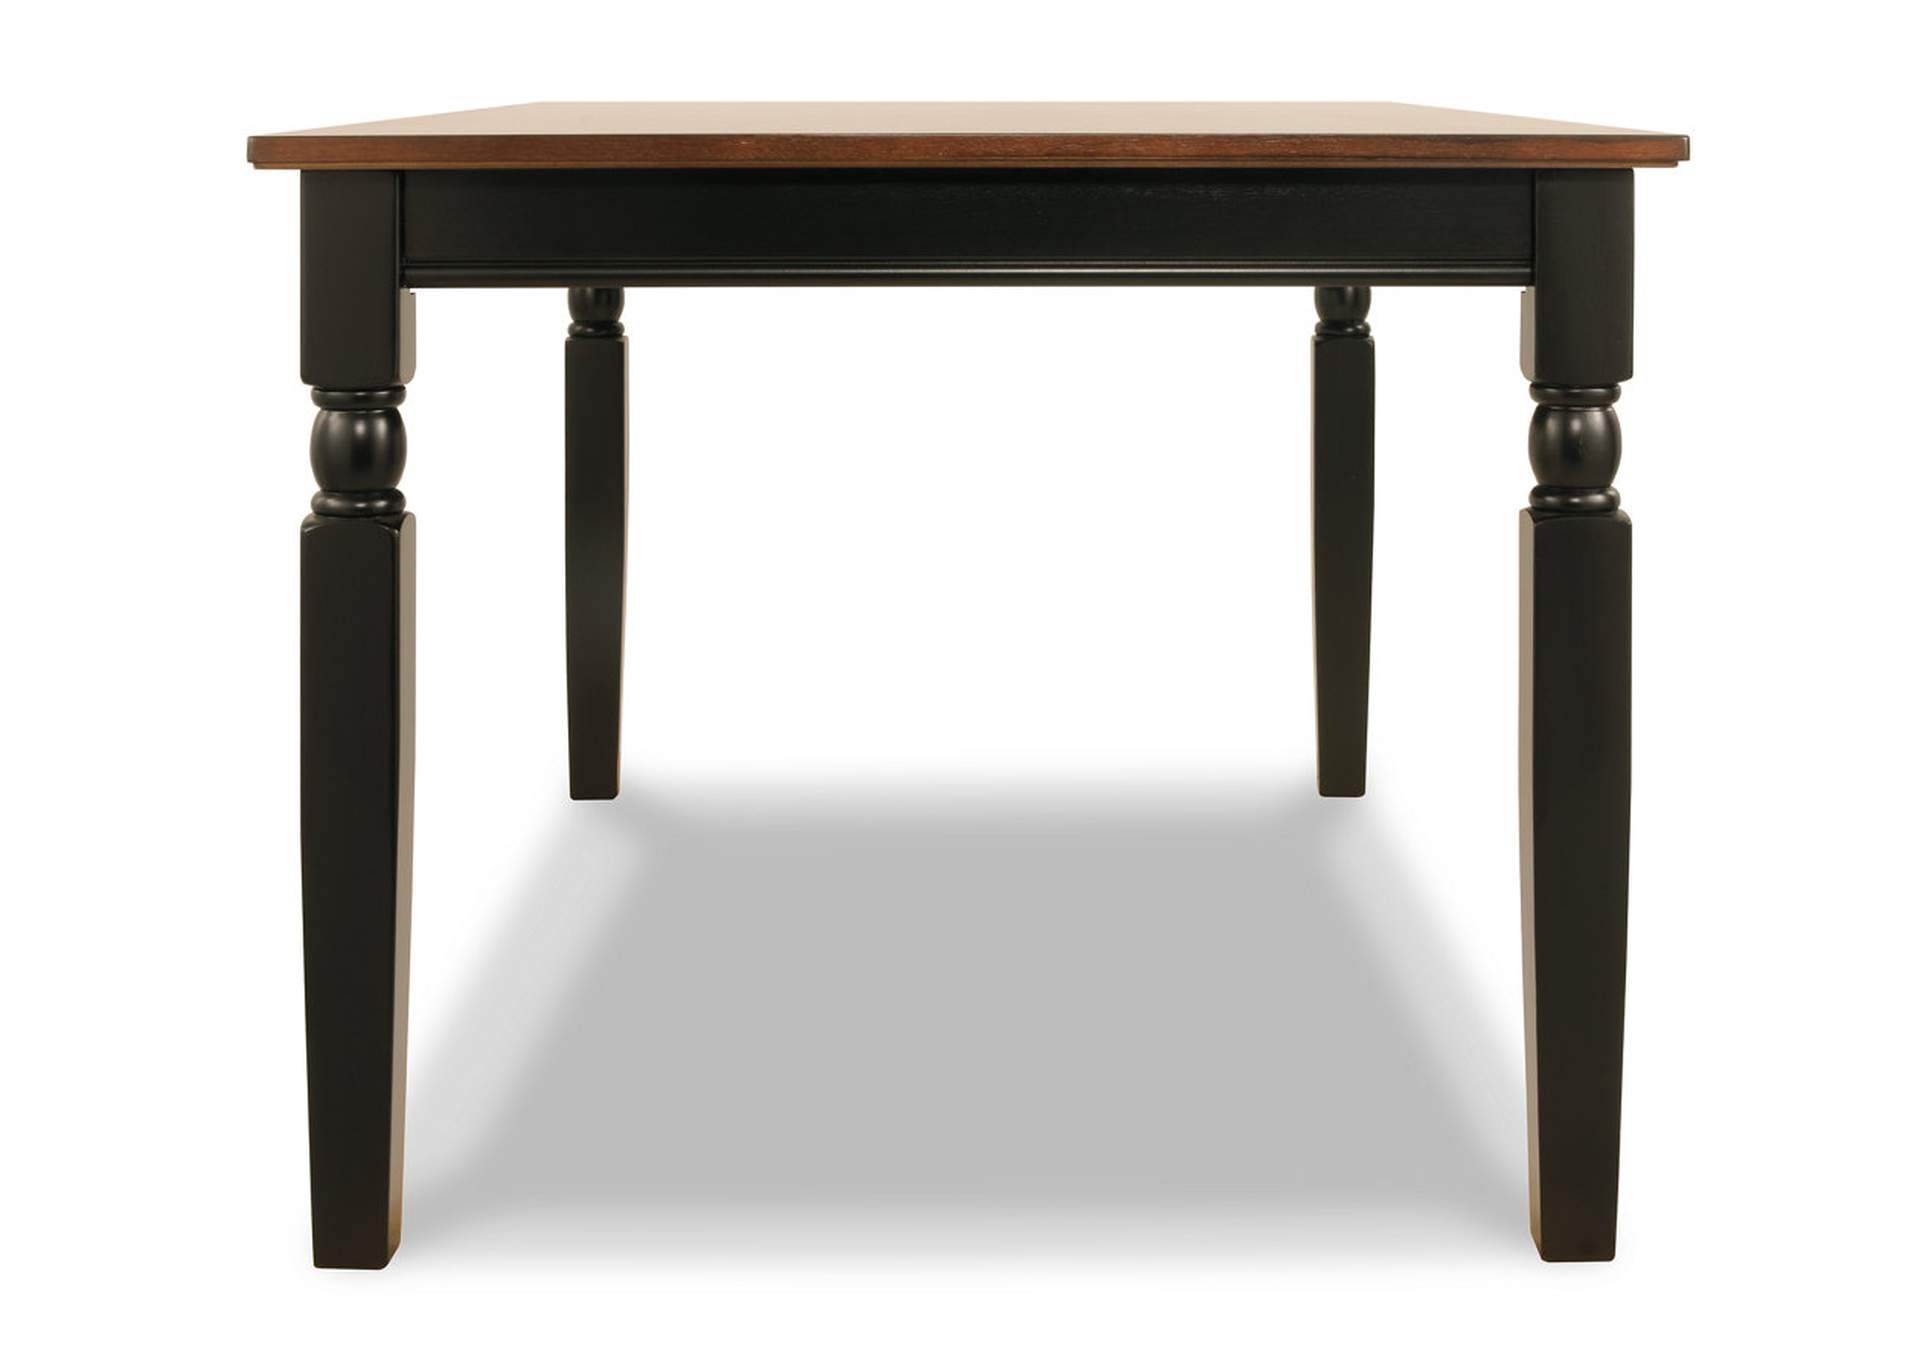 Owingsville Dining Table,Signature Design By Ashley